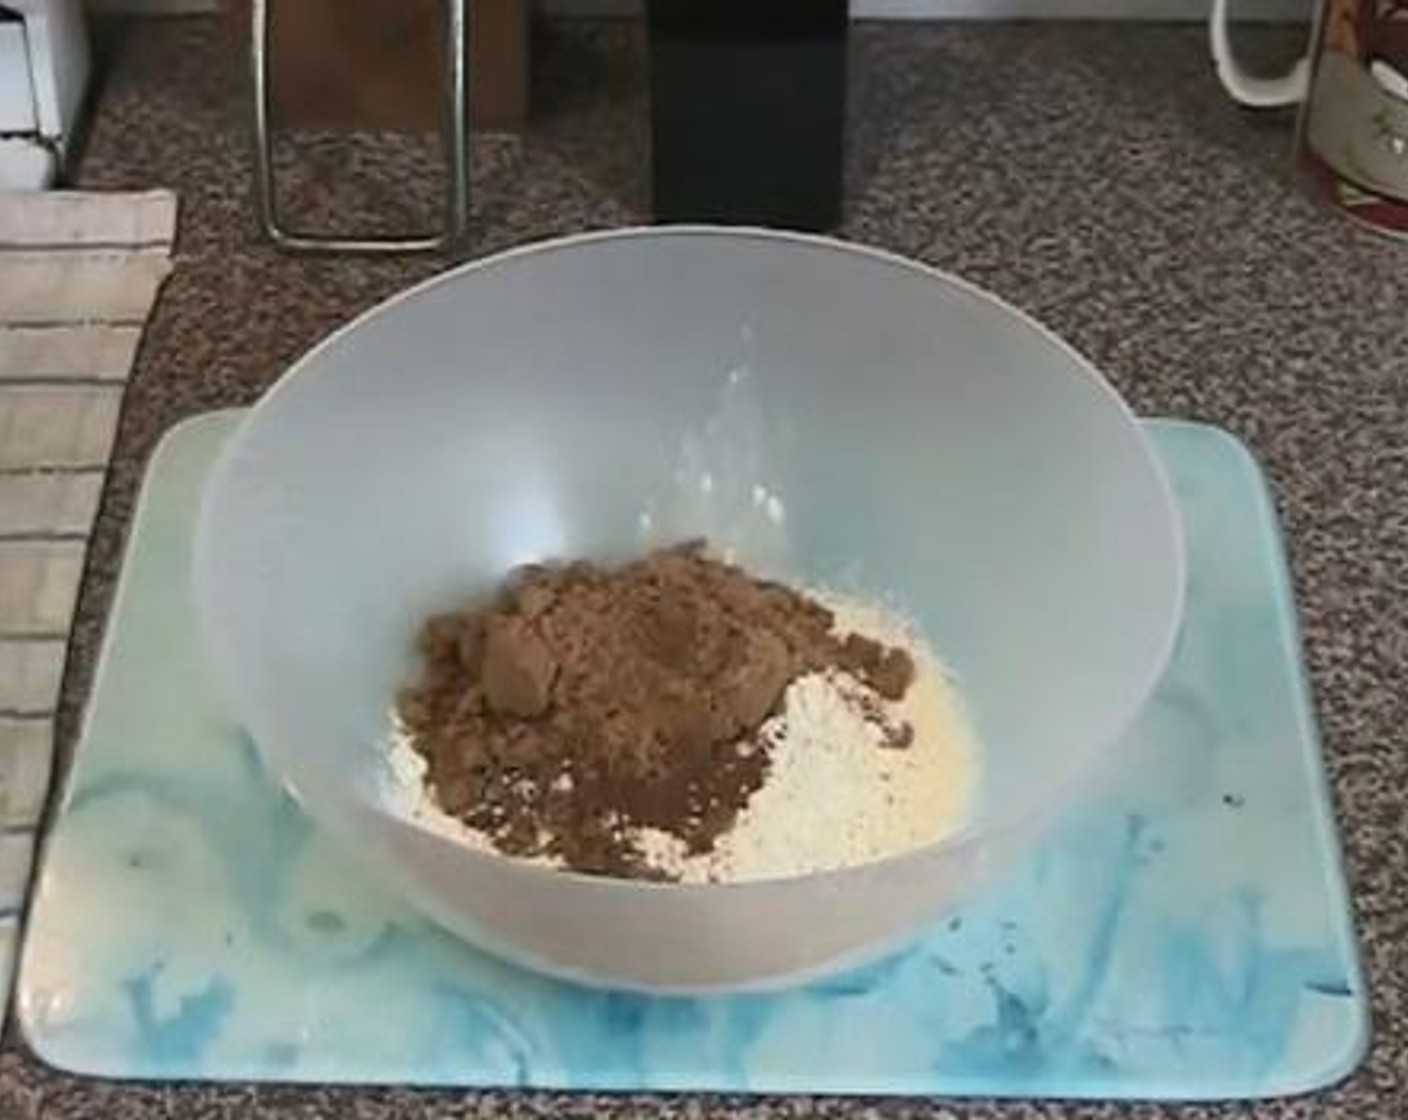 step 1 Into a large bowl, add and mix the All-Purpose Flour (1 cup), Self-Rising Flour (1/2 cup), Ground Cinnamon (1 tsp), and Brown Sugar (1 cup).